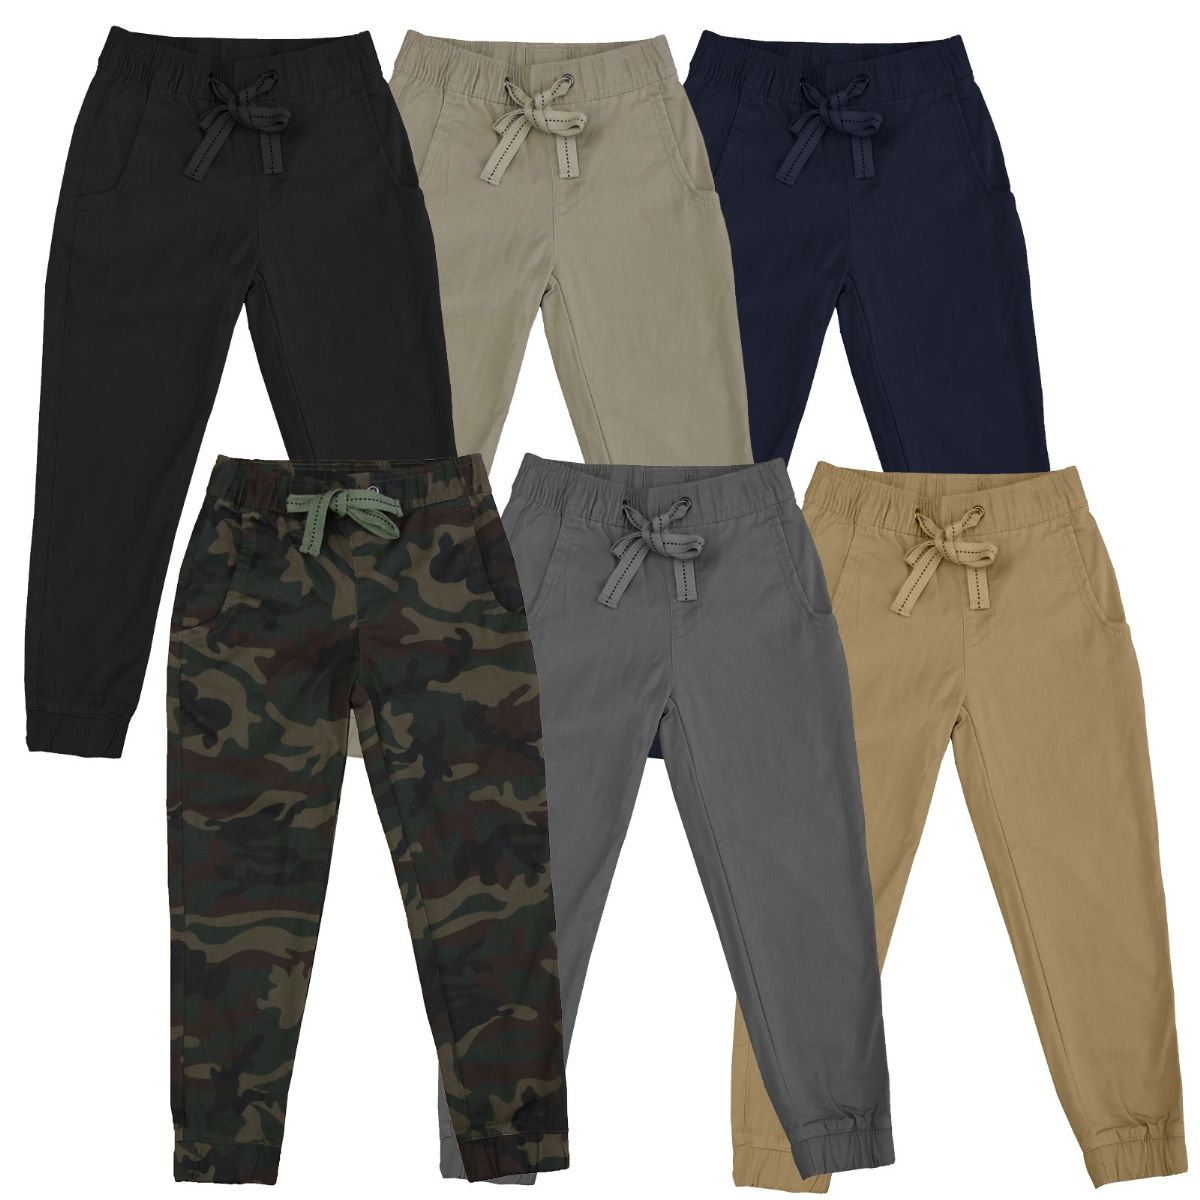 24 Pieces of Youth Boy Twill Jogger Pants In Assorted Colors Size S